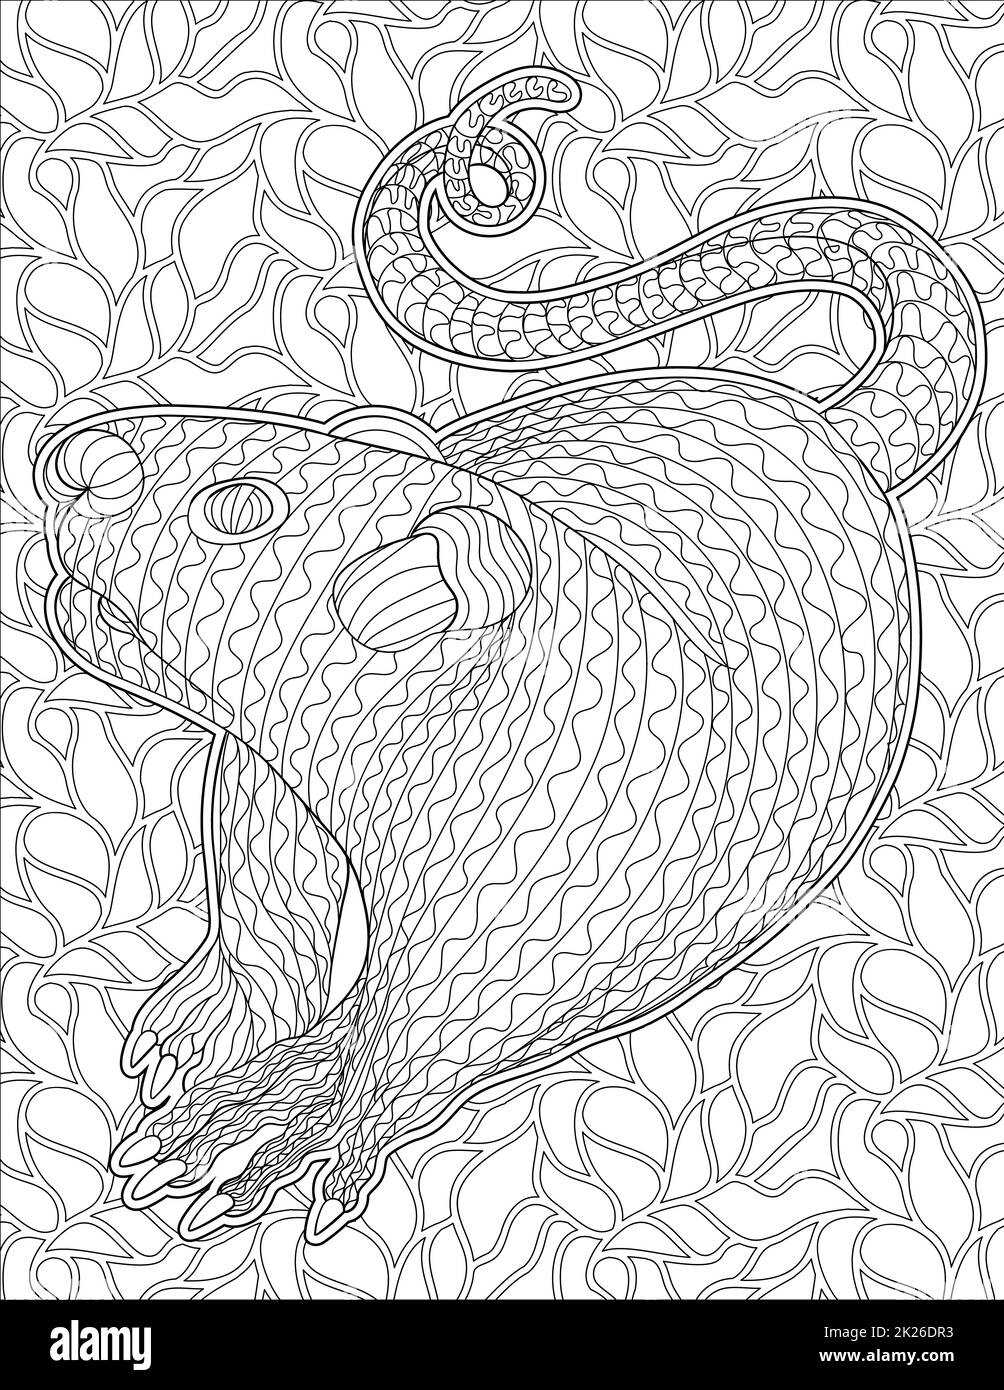 Rat Line Drawing With Geometric Background Pattern Coloring Book idea Stock Photo